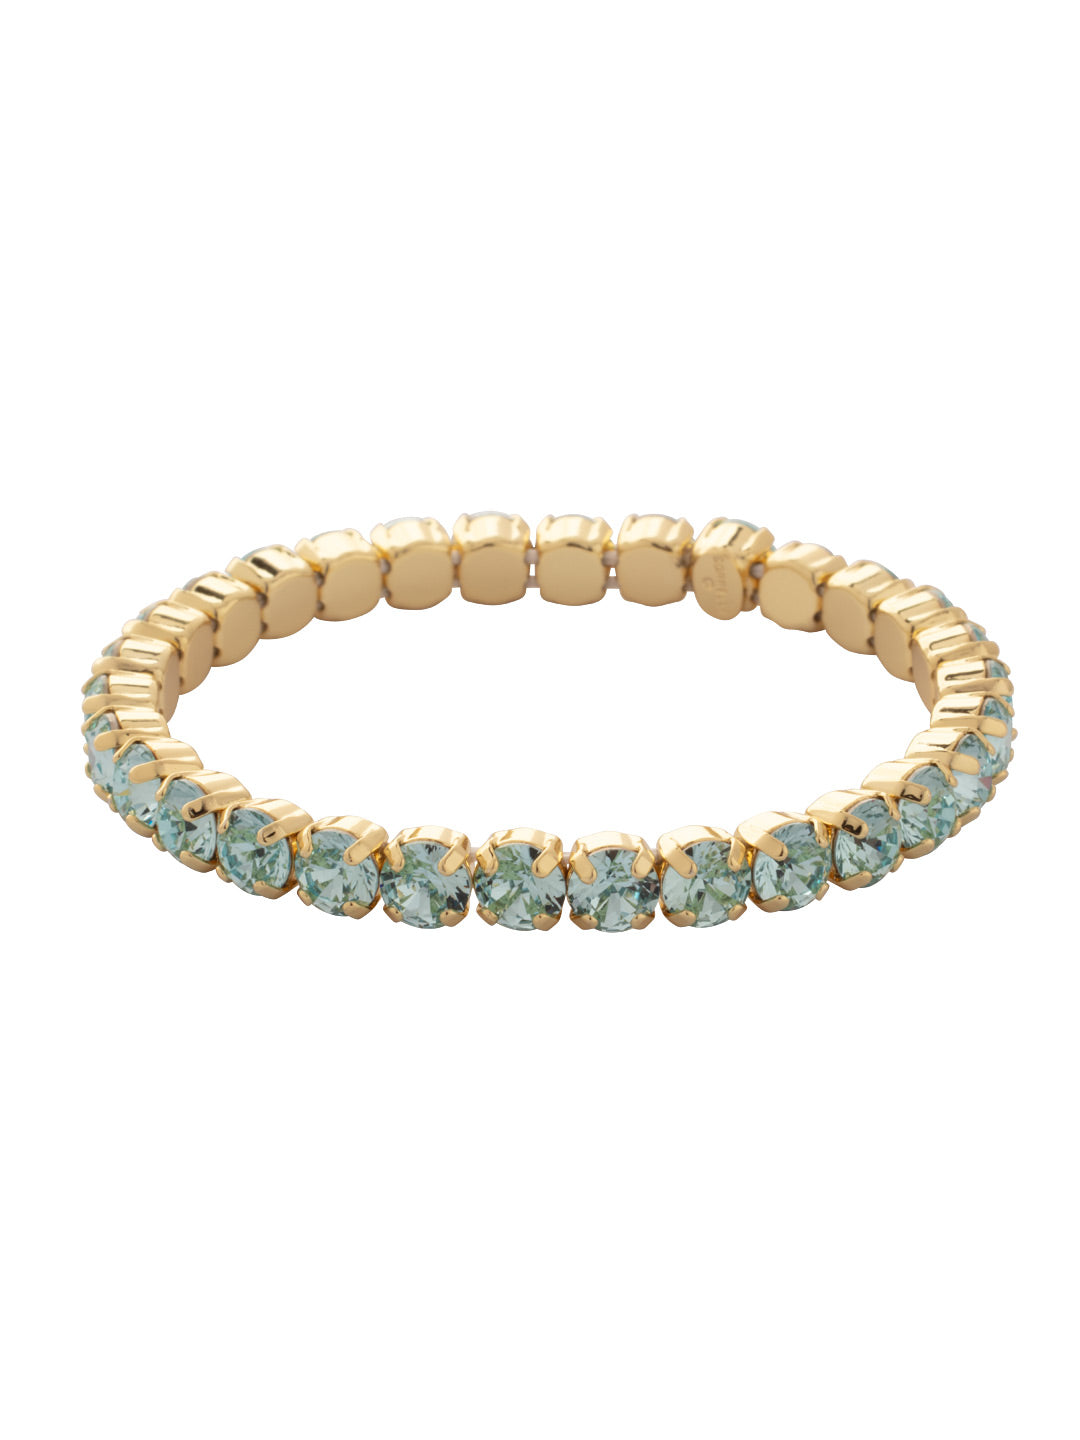 Mini Sienna Stretch Bracelet - BFD52BGAQU - <p>The Mini Sienna Stretch Bracelet is a mini take on a bestselling style! The Mini Sienna Stretch Bracelet features a line of small round crystals on a sturdy jewelers' filament, stretching to fit most wrists comfortably, without the hassle of a clasp! From Sorrelli's Aquamarine collection in our Bright Gold-tone finish.</p>